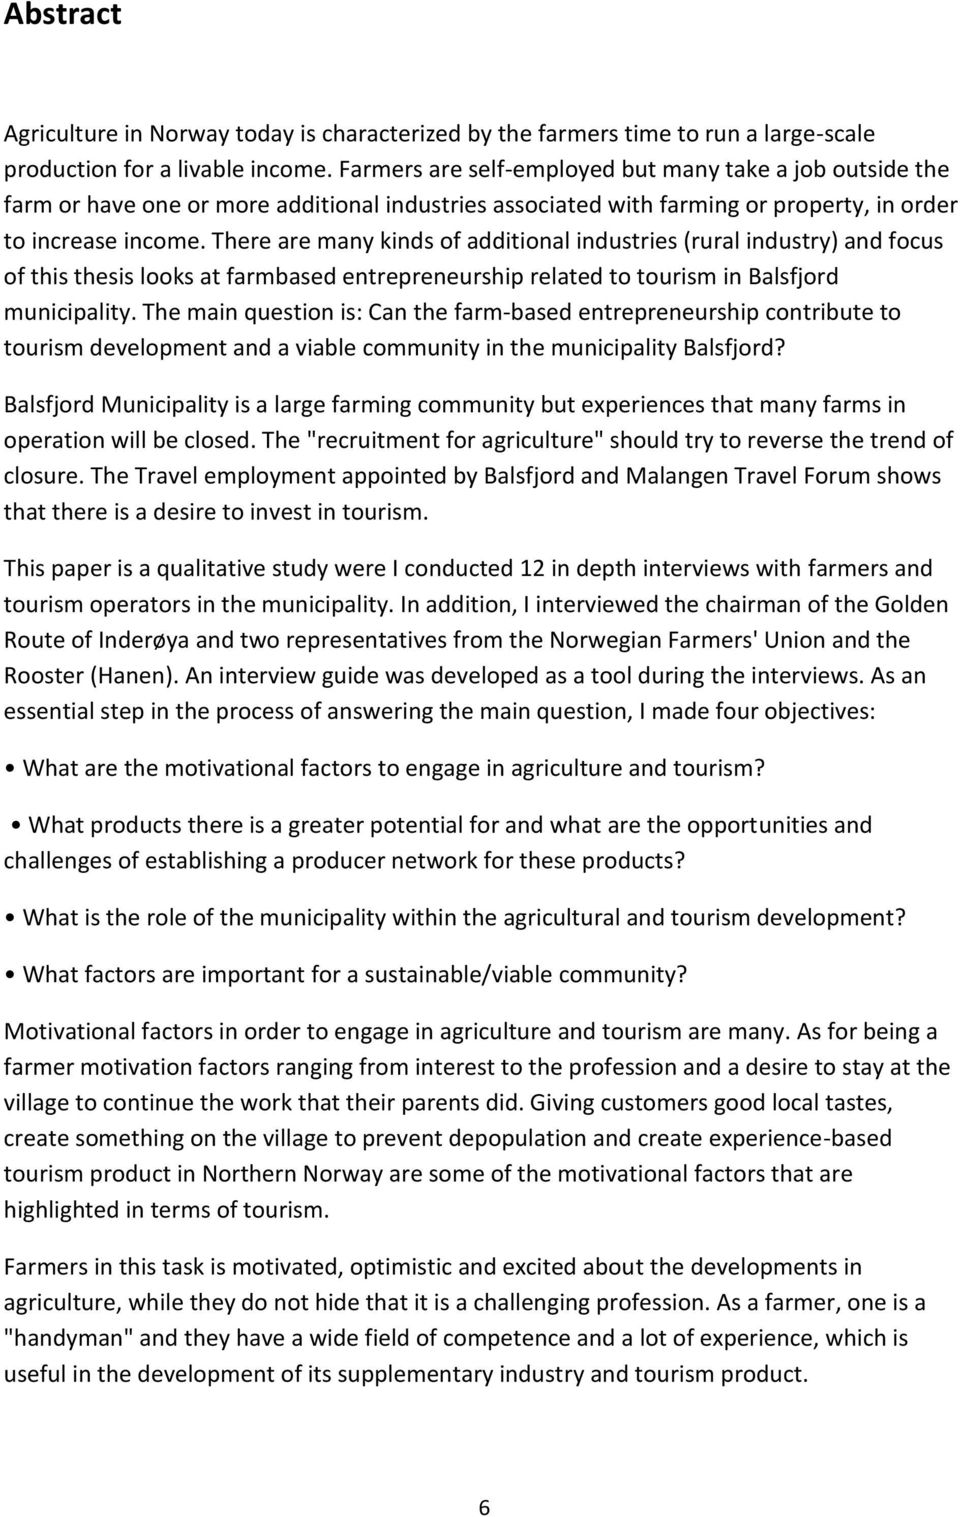 There are many kinds of additional industries (rural industry) and focus of this thesis looks at farmbased entrepreneurship related to tourism in Balsfjord municipality.